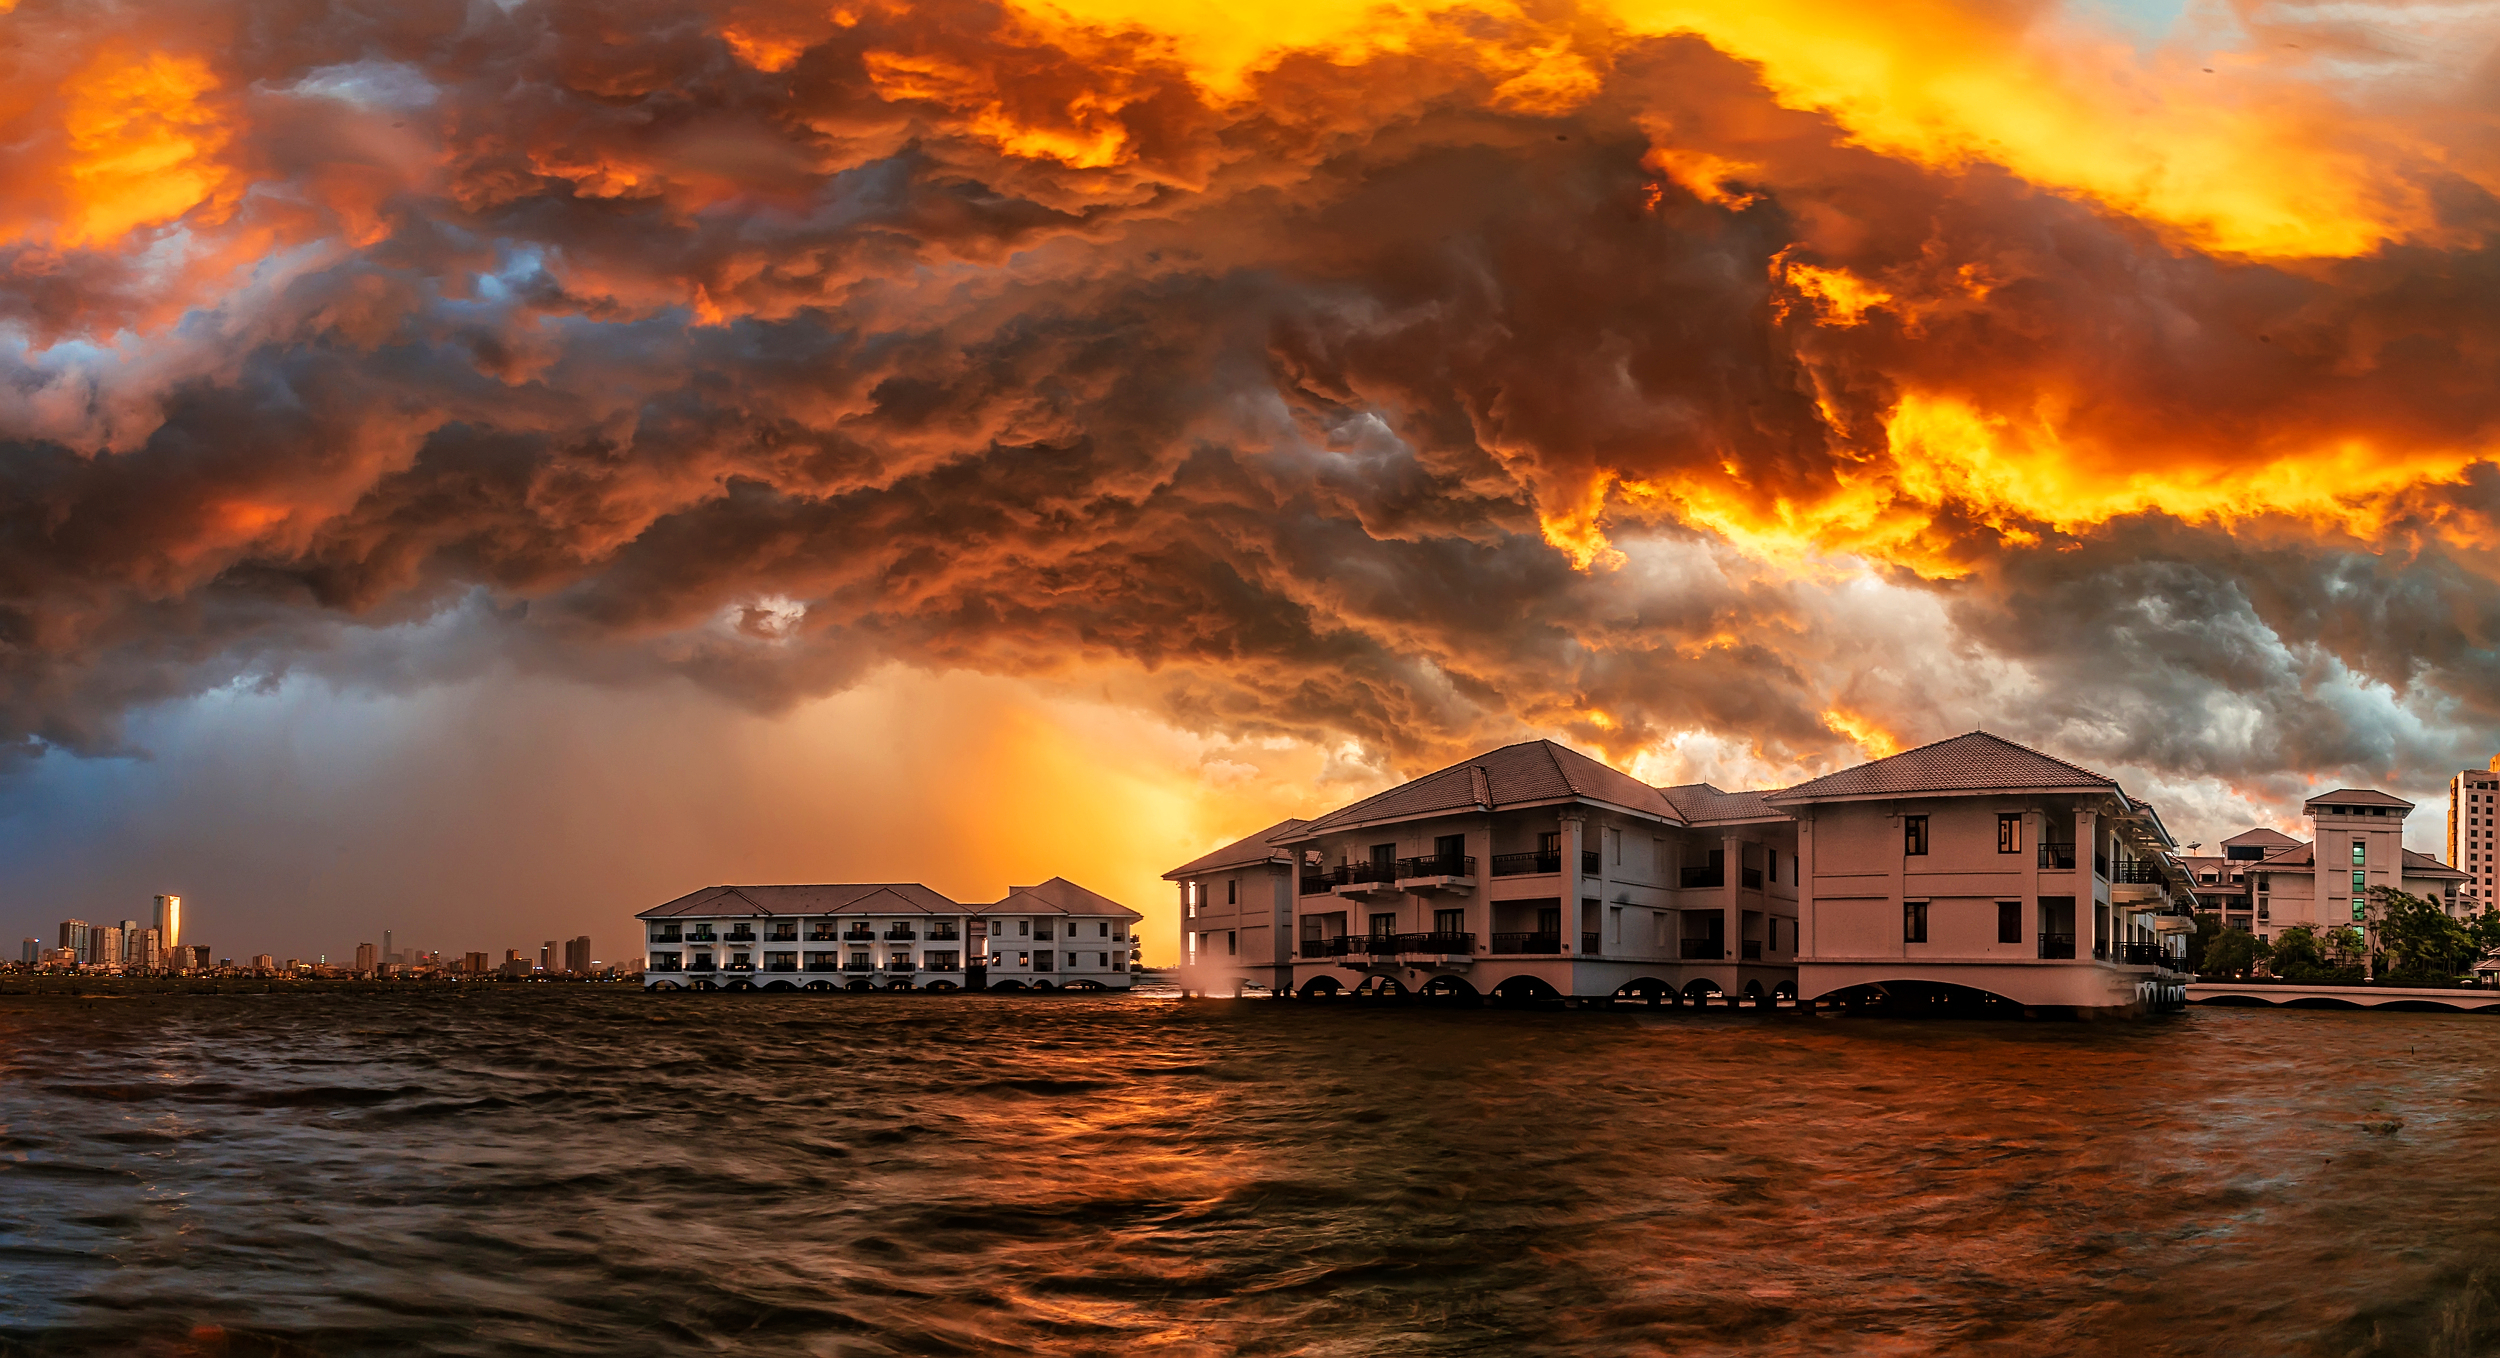 Sunset Storm Sky Clouds Water Urban Photography HDR Sun City Outdoors 2500x1358